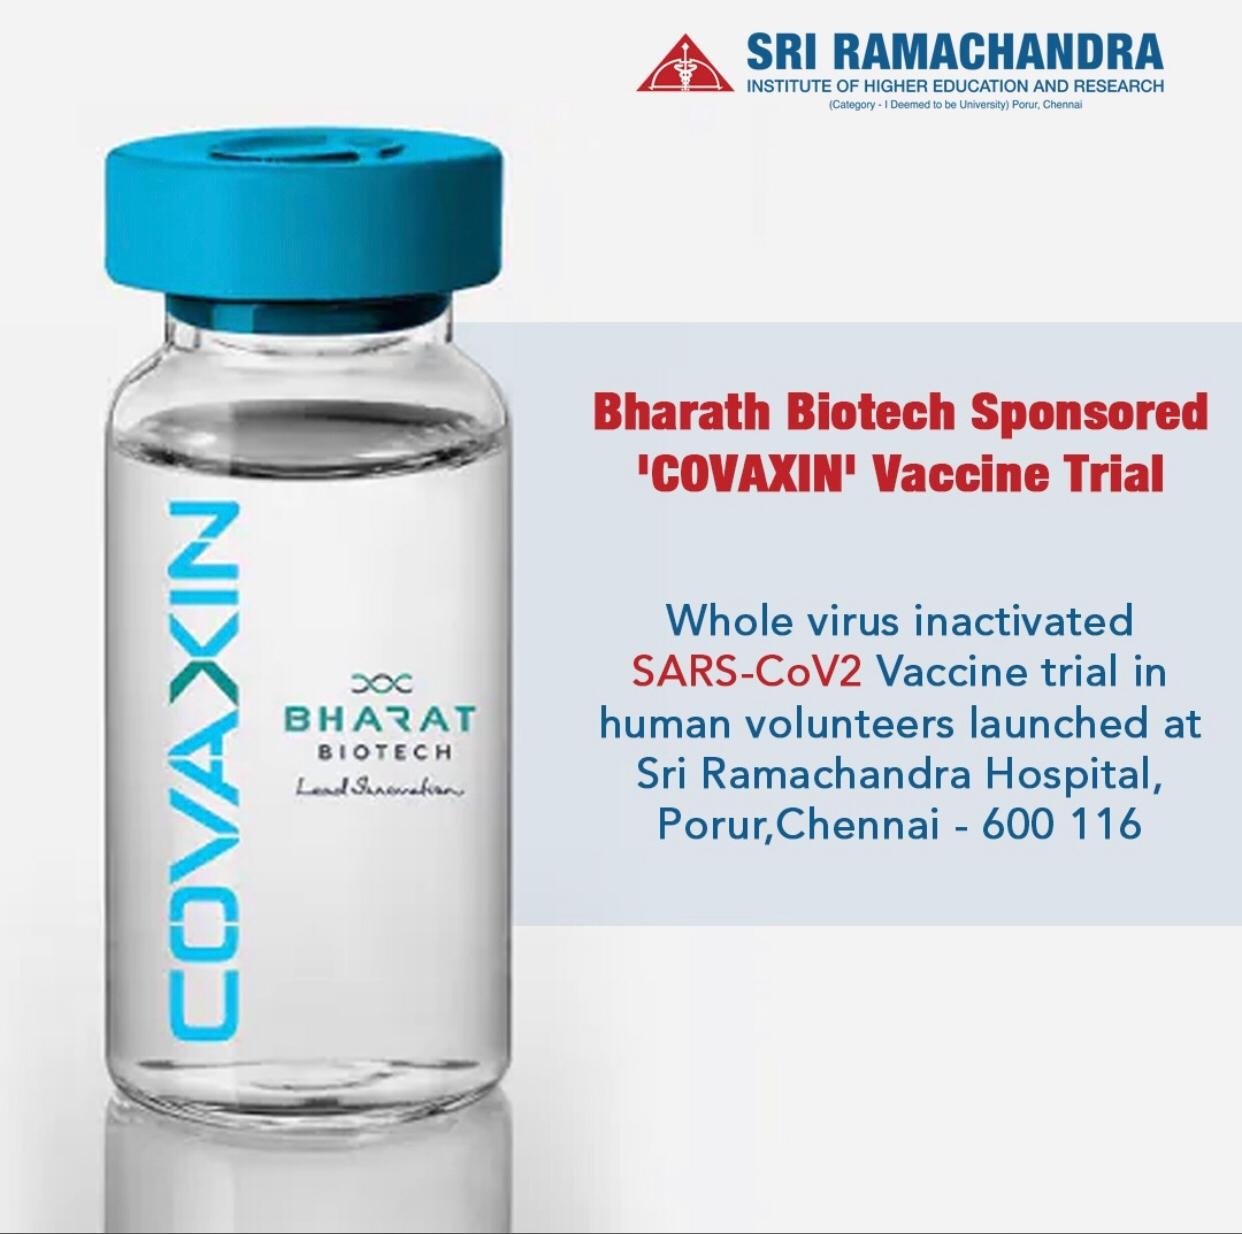 Bharath Biotech Sponsored 'COVAXIN' Vaccine Trial